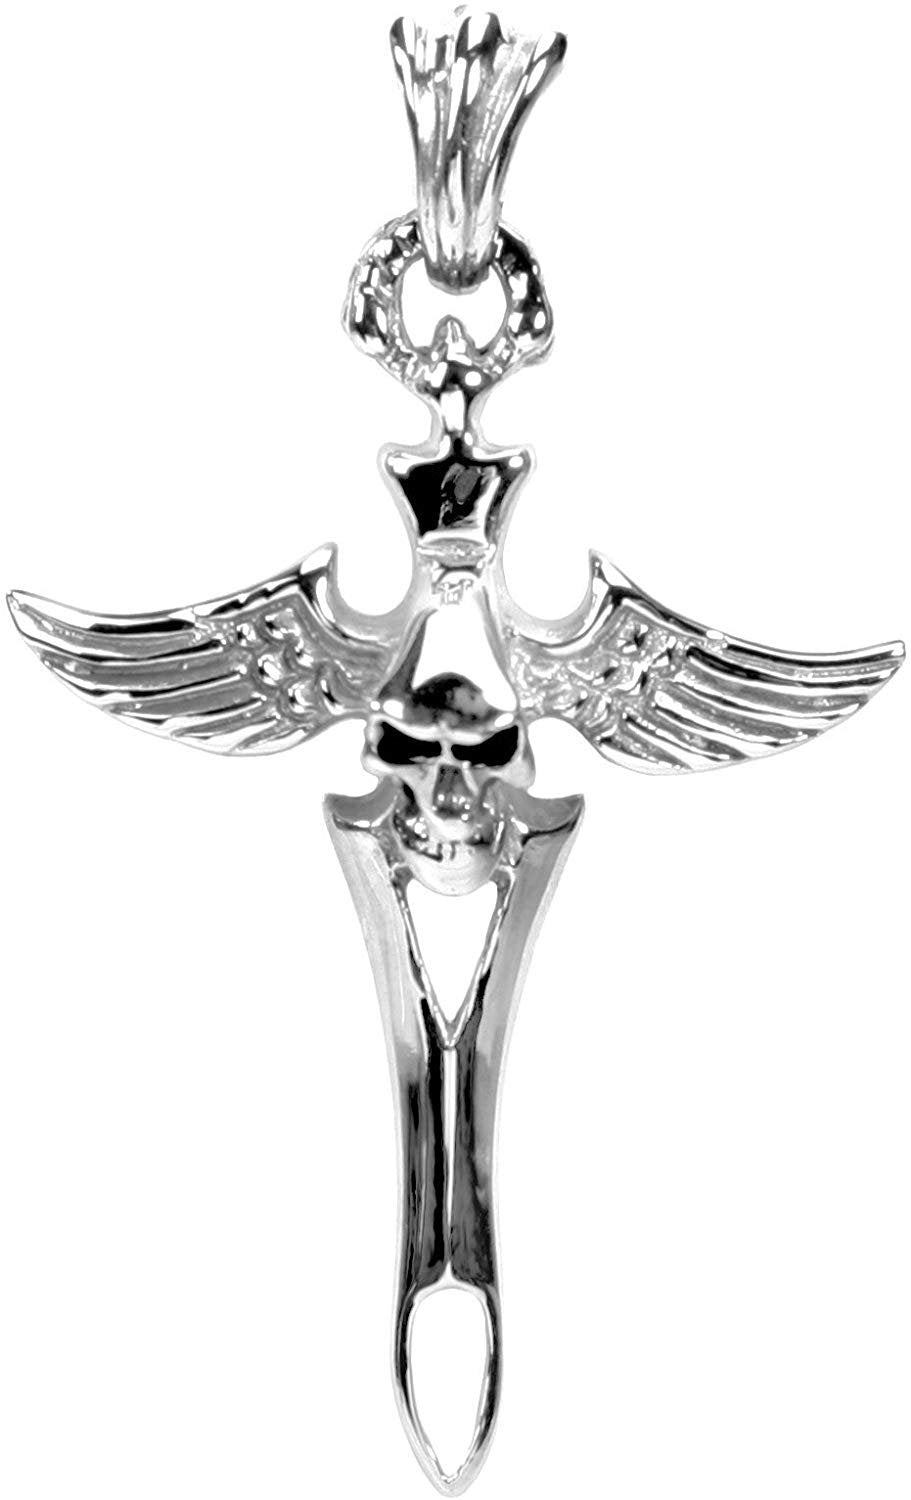 YTC Summit Winged Skull Dagger Pendant - Collectible Medallion Necklace Accessory